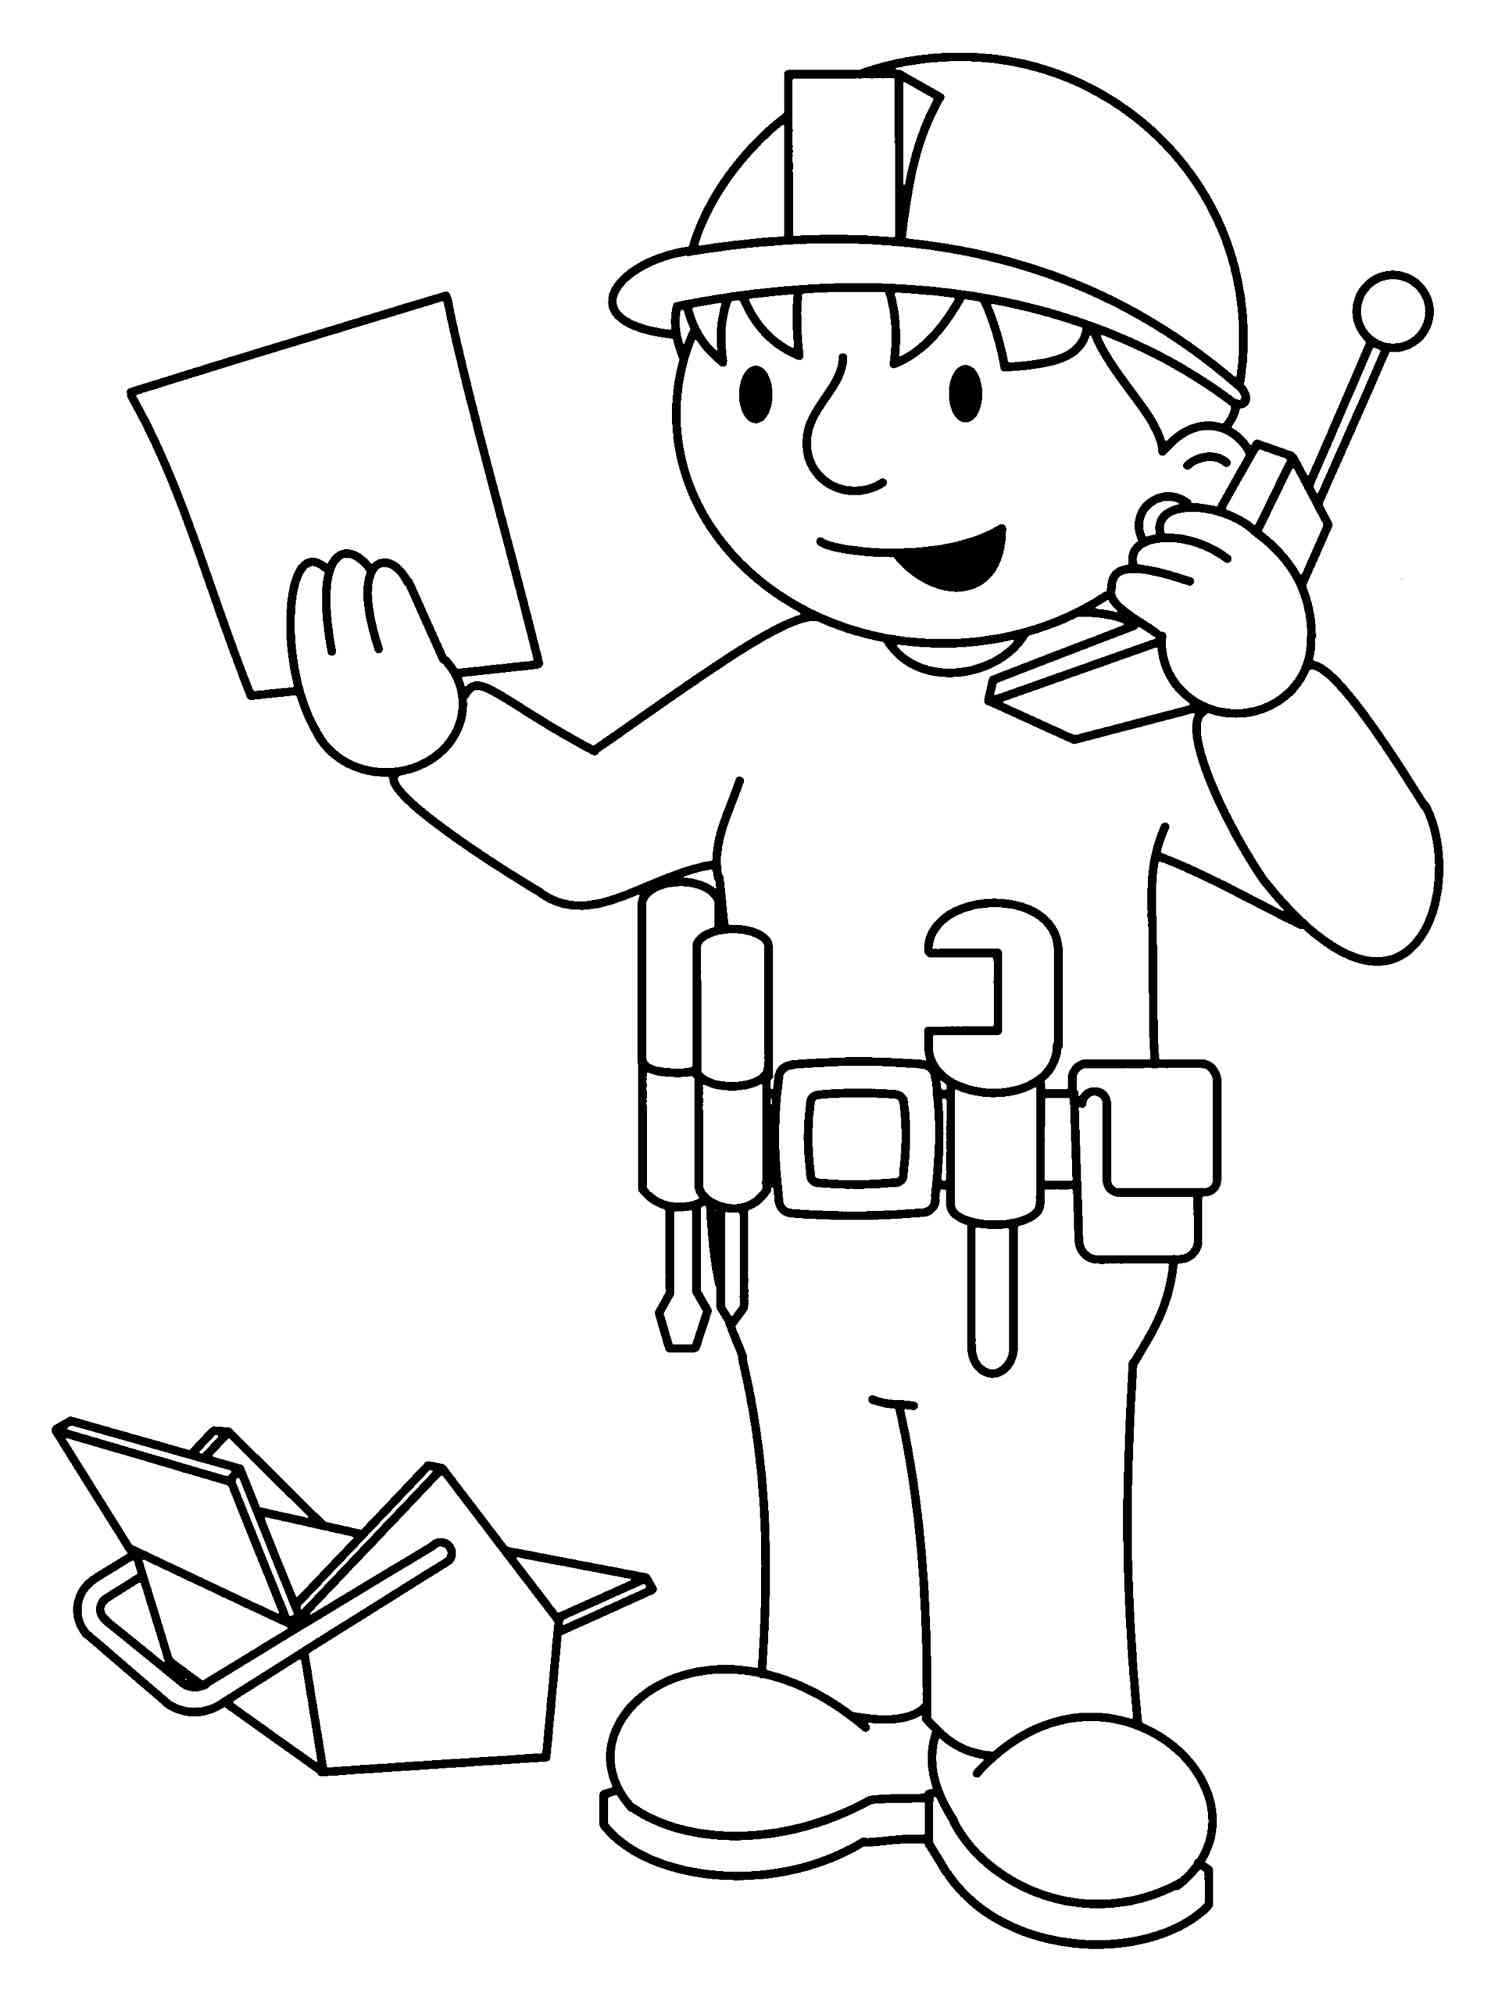 Bob The Builder 53 coloring page